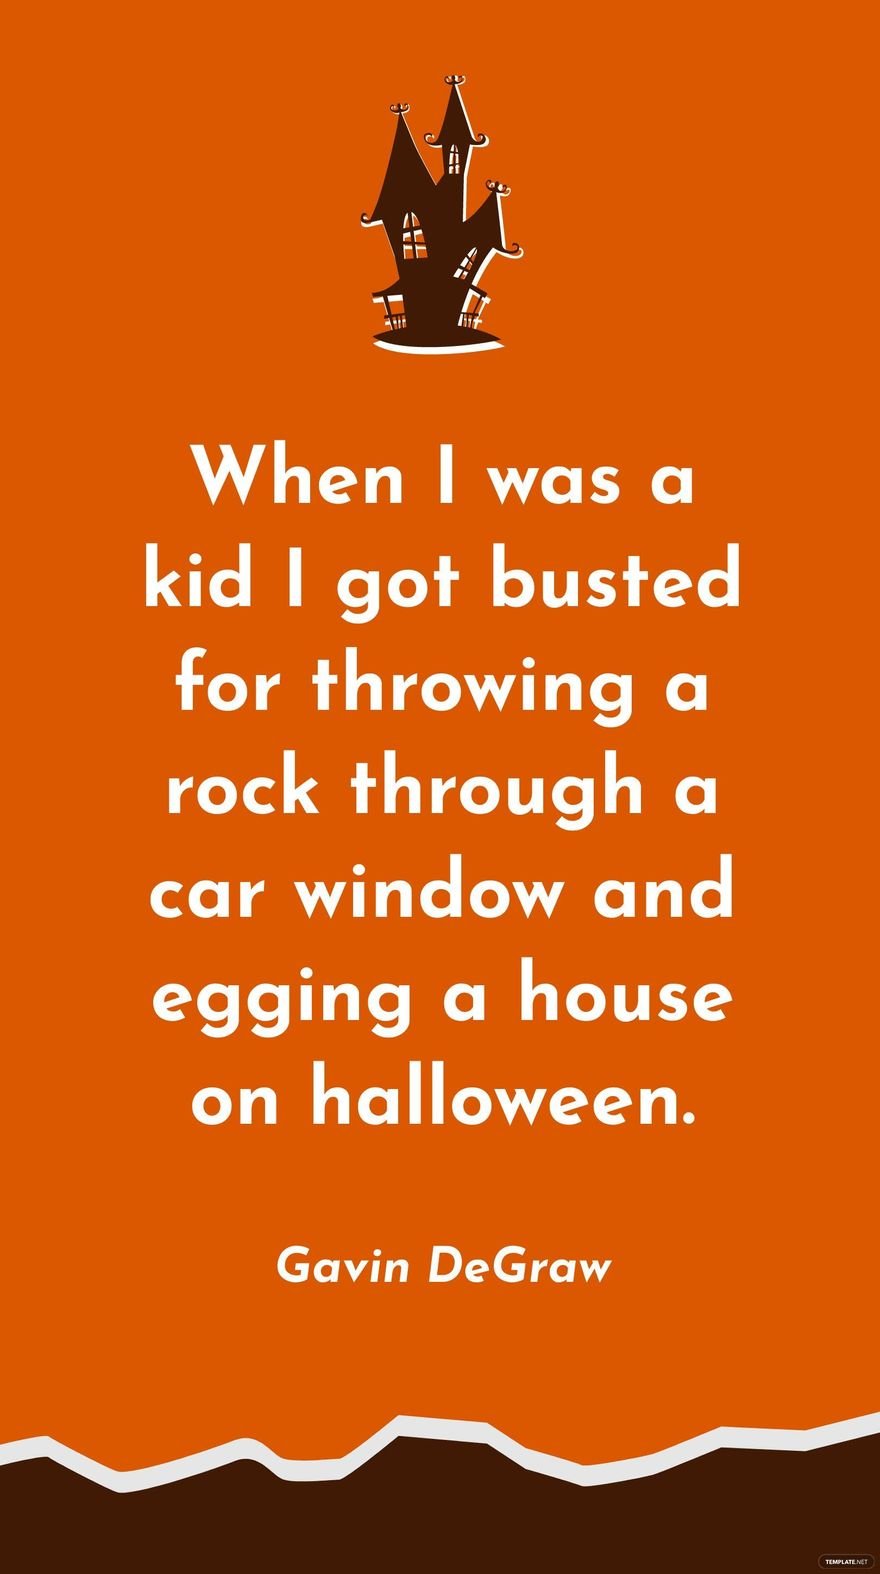 Free Gavin DeGraw - When I was a kid I got busted for throwing a rock through a car window and egging a house on halloween. in JPG